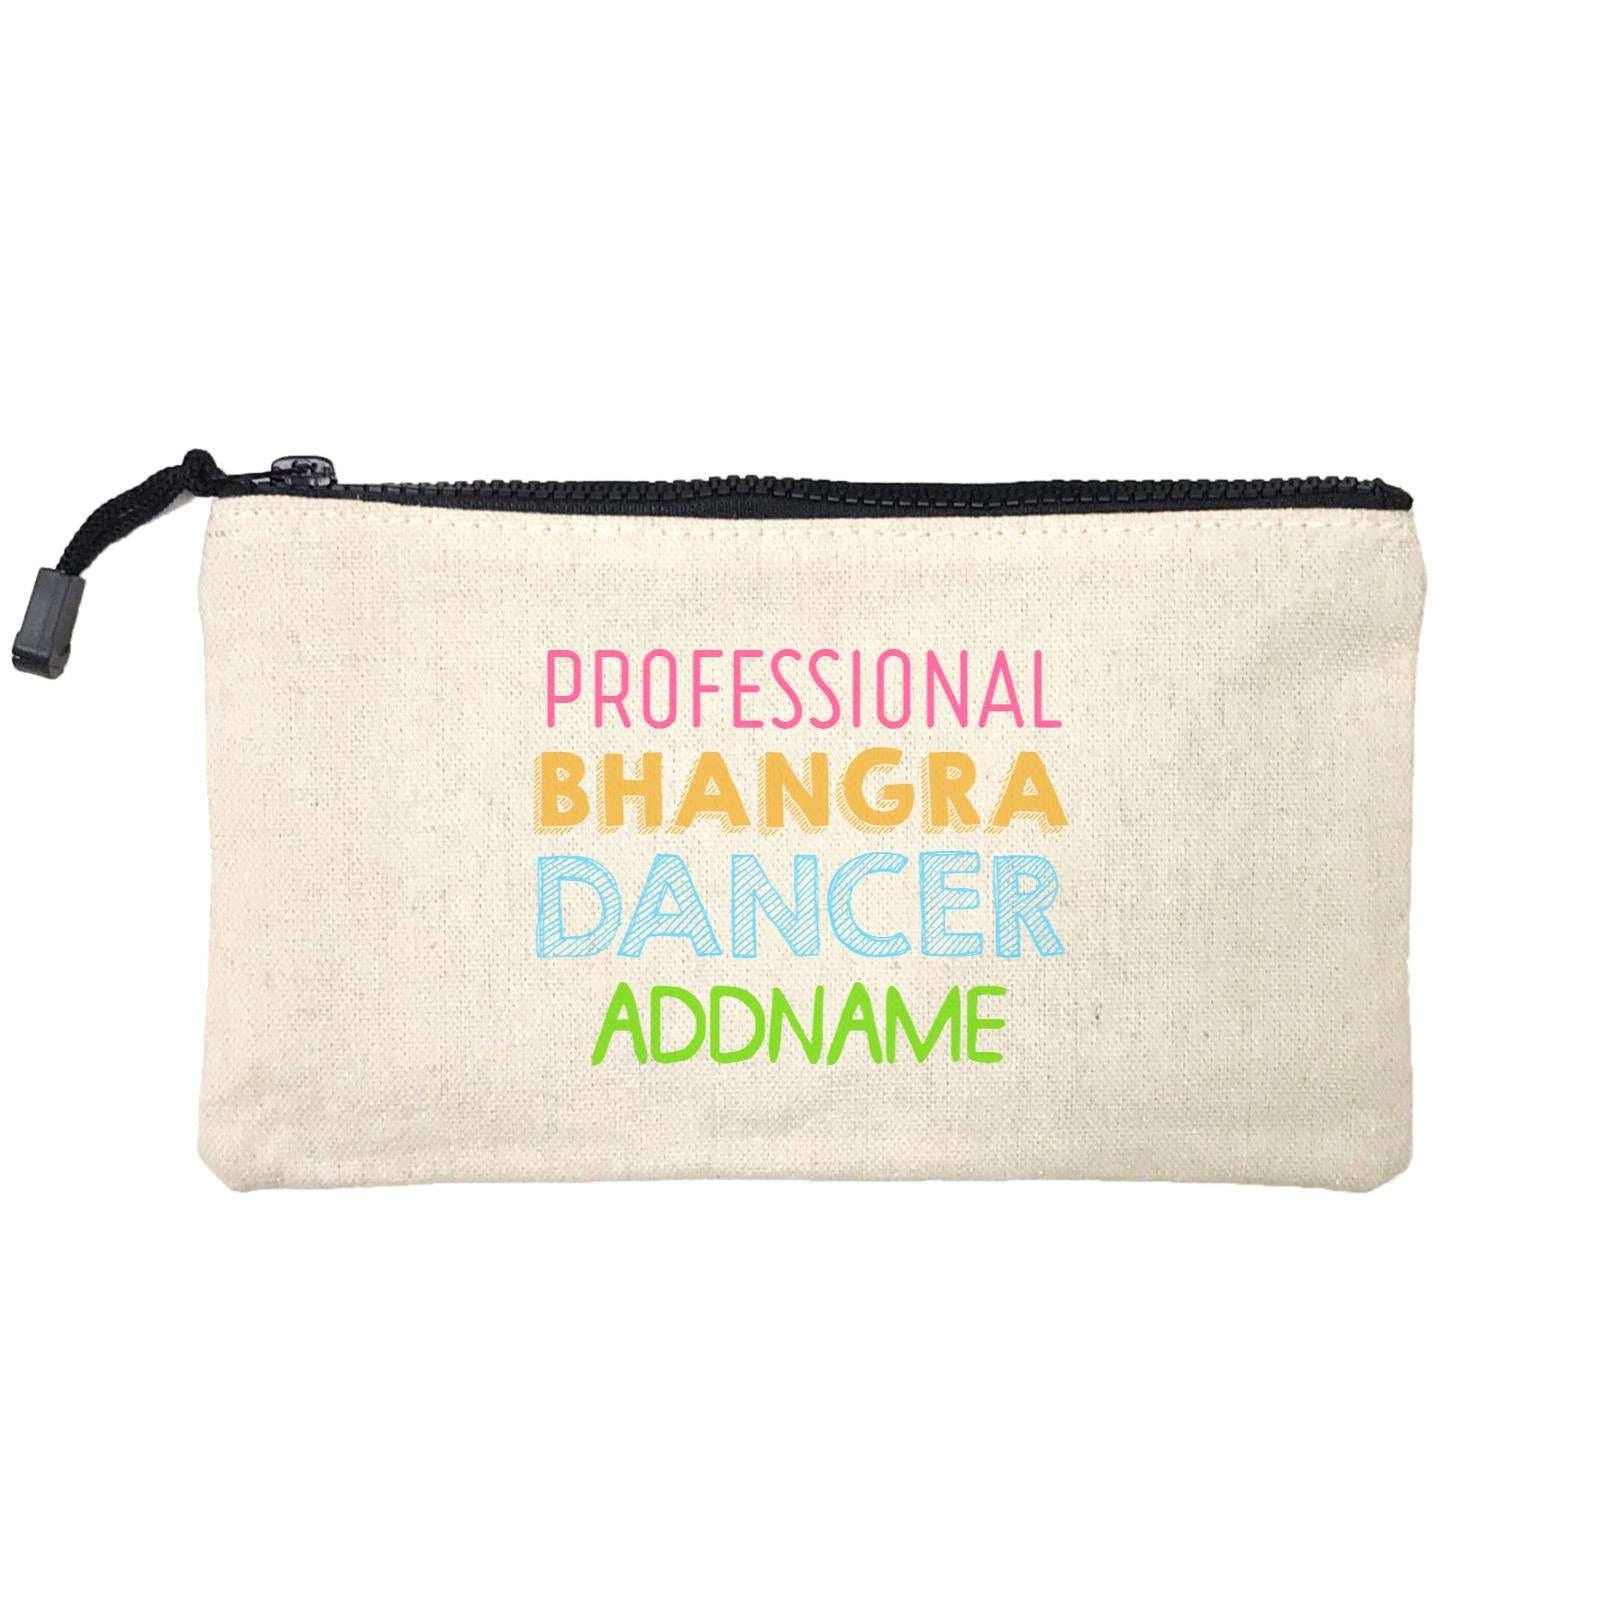 Professional Bhangra Dancer Addname Mini Accessories Stationery Pouch